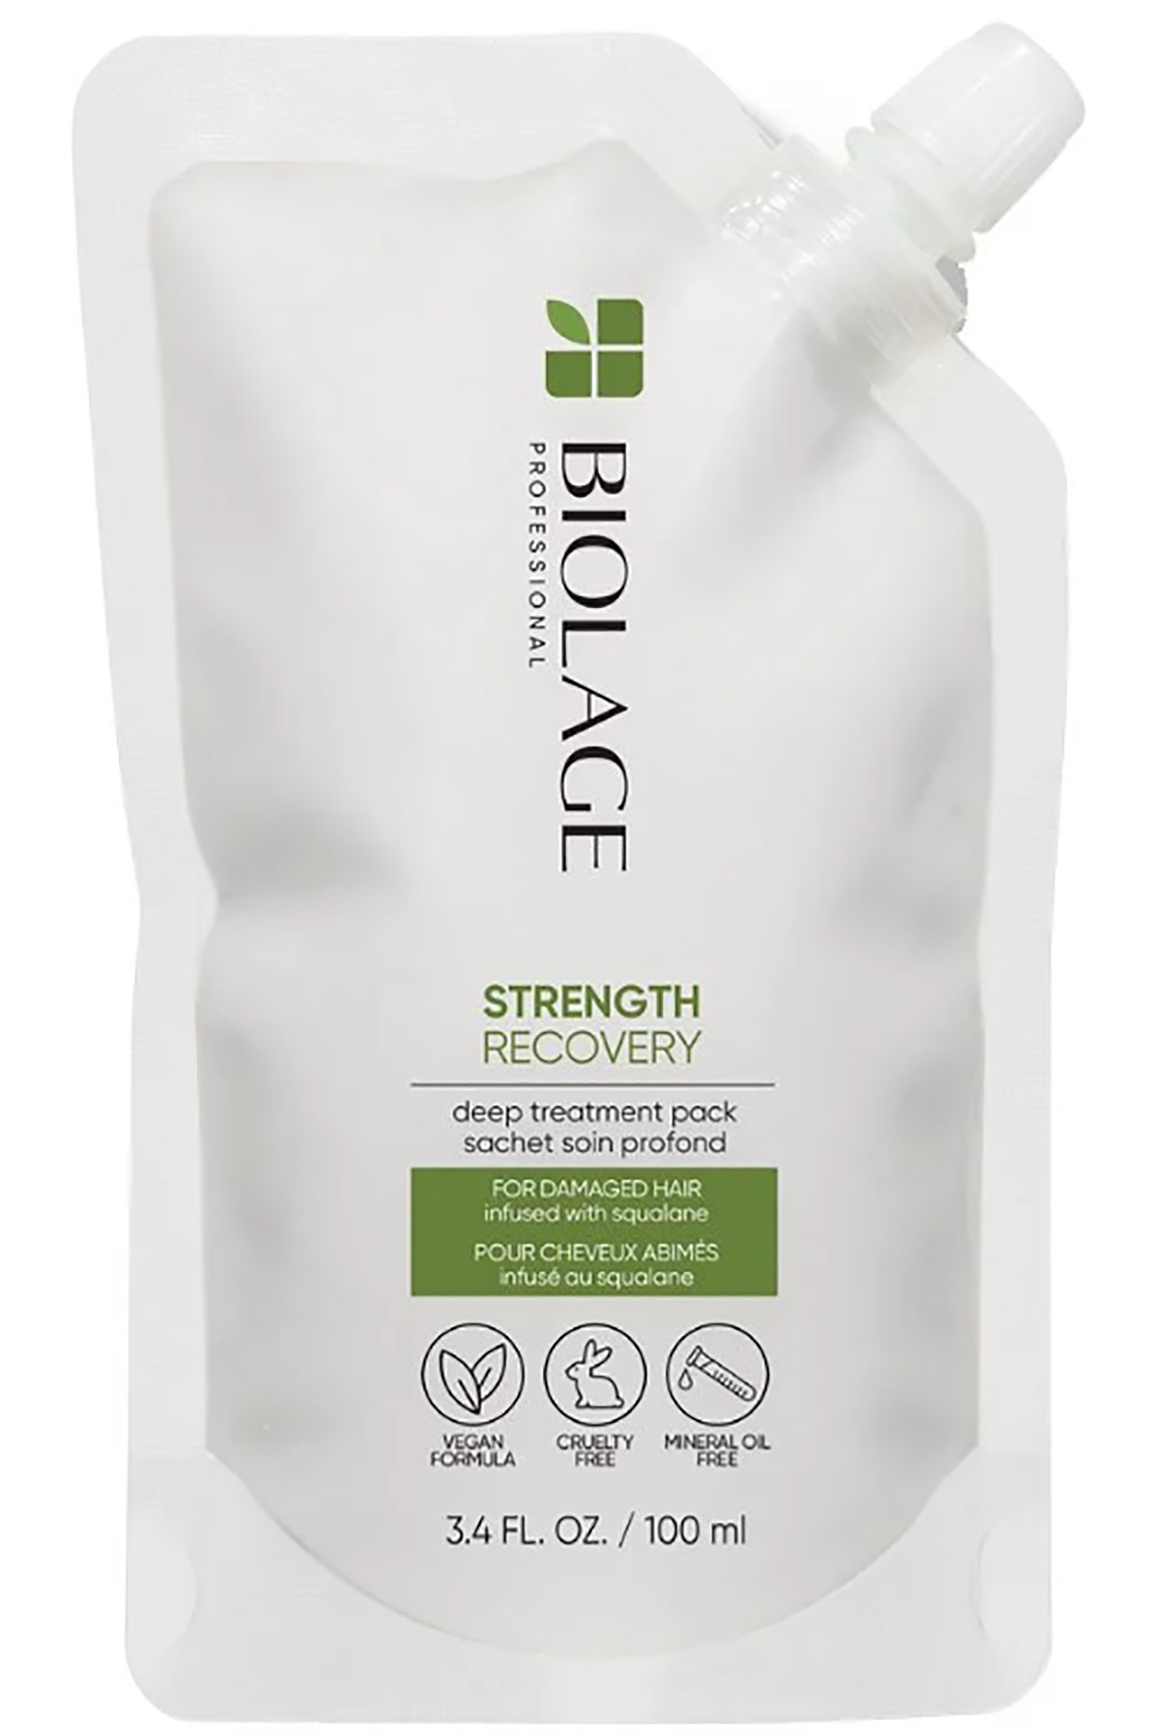 Biolage Strength Recovery Deep Treatment Pack